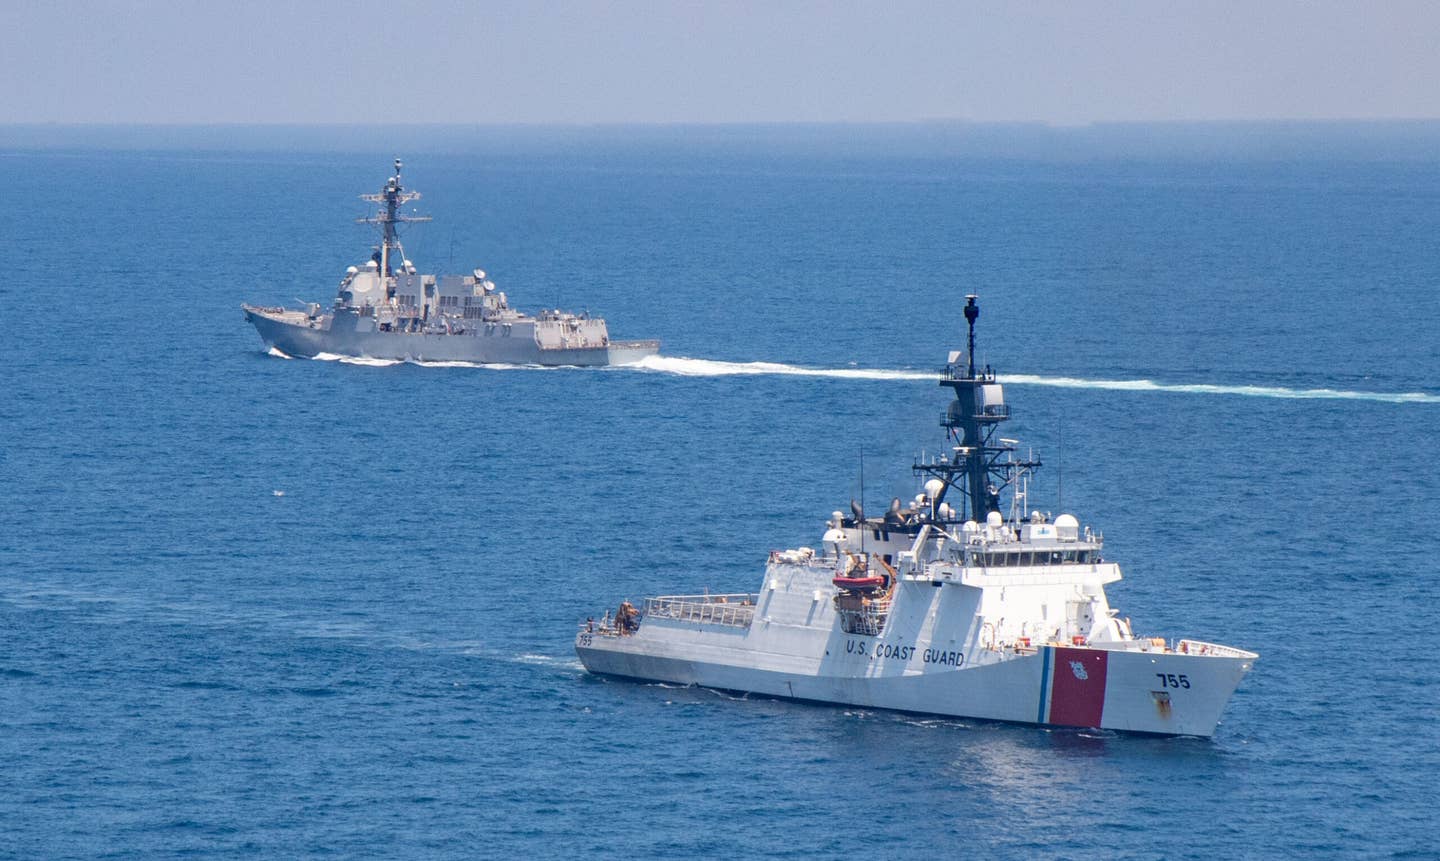 The US Coast Guard's <em>Legend</em> class National Security Cutter USCGC<em> Munro</em>, in the foreground, and the US Navy's <em>Arleigh Burke</em> class destroyer USS <em>Kidd</em>, in the background, in the Taiwan Strait in 2021. U.S. warships sail through this waterway, which Chinese authorities claim as their sovereign territory, with some regularity as part of so-called Freedom of Navigation patrols, or FONOPs. <em>USN</em>